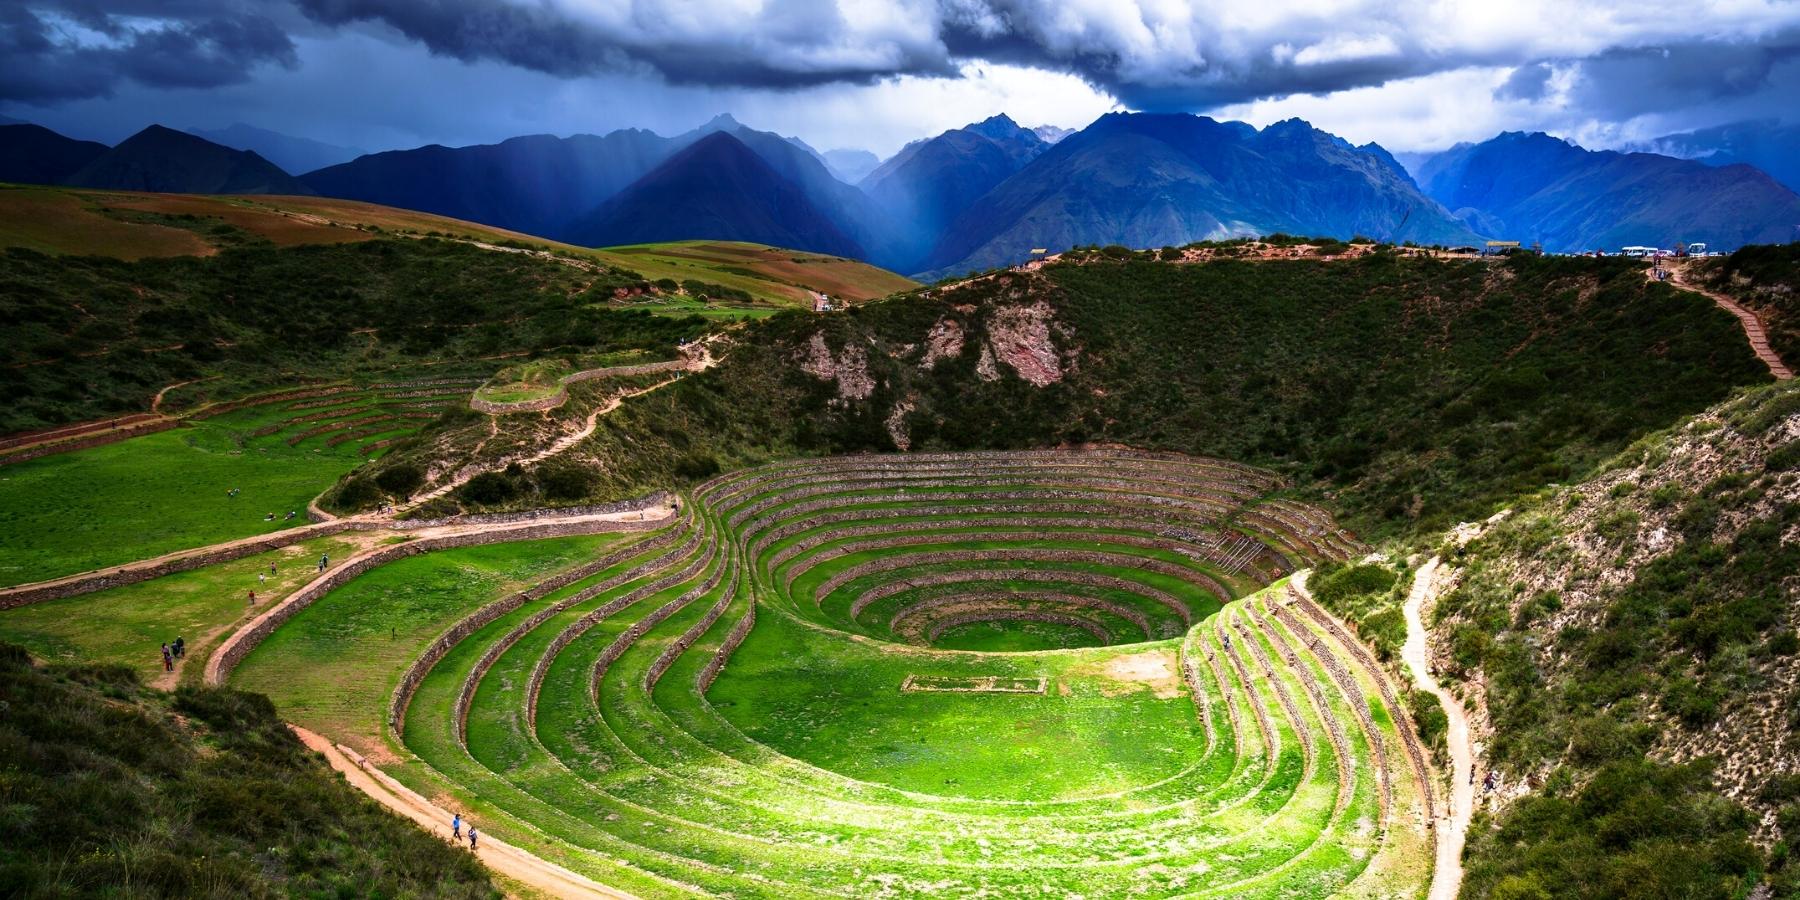 Explore Cusco, Machu Picchu and Sacred Valley 3 Days | Inca Trail Expeditions